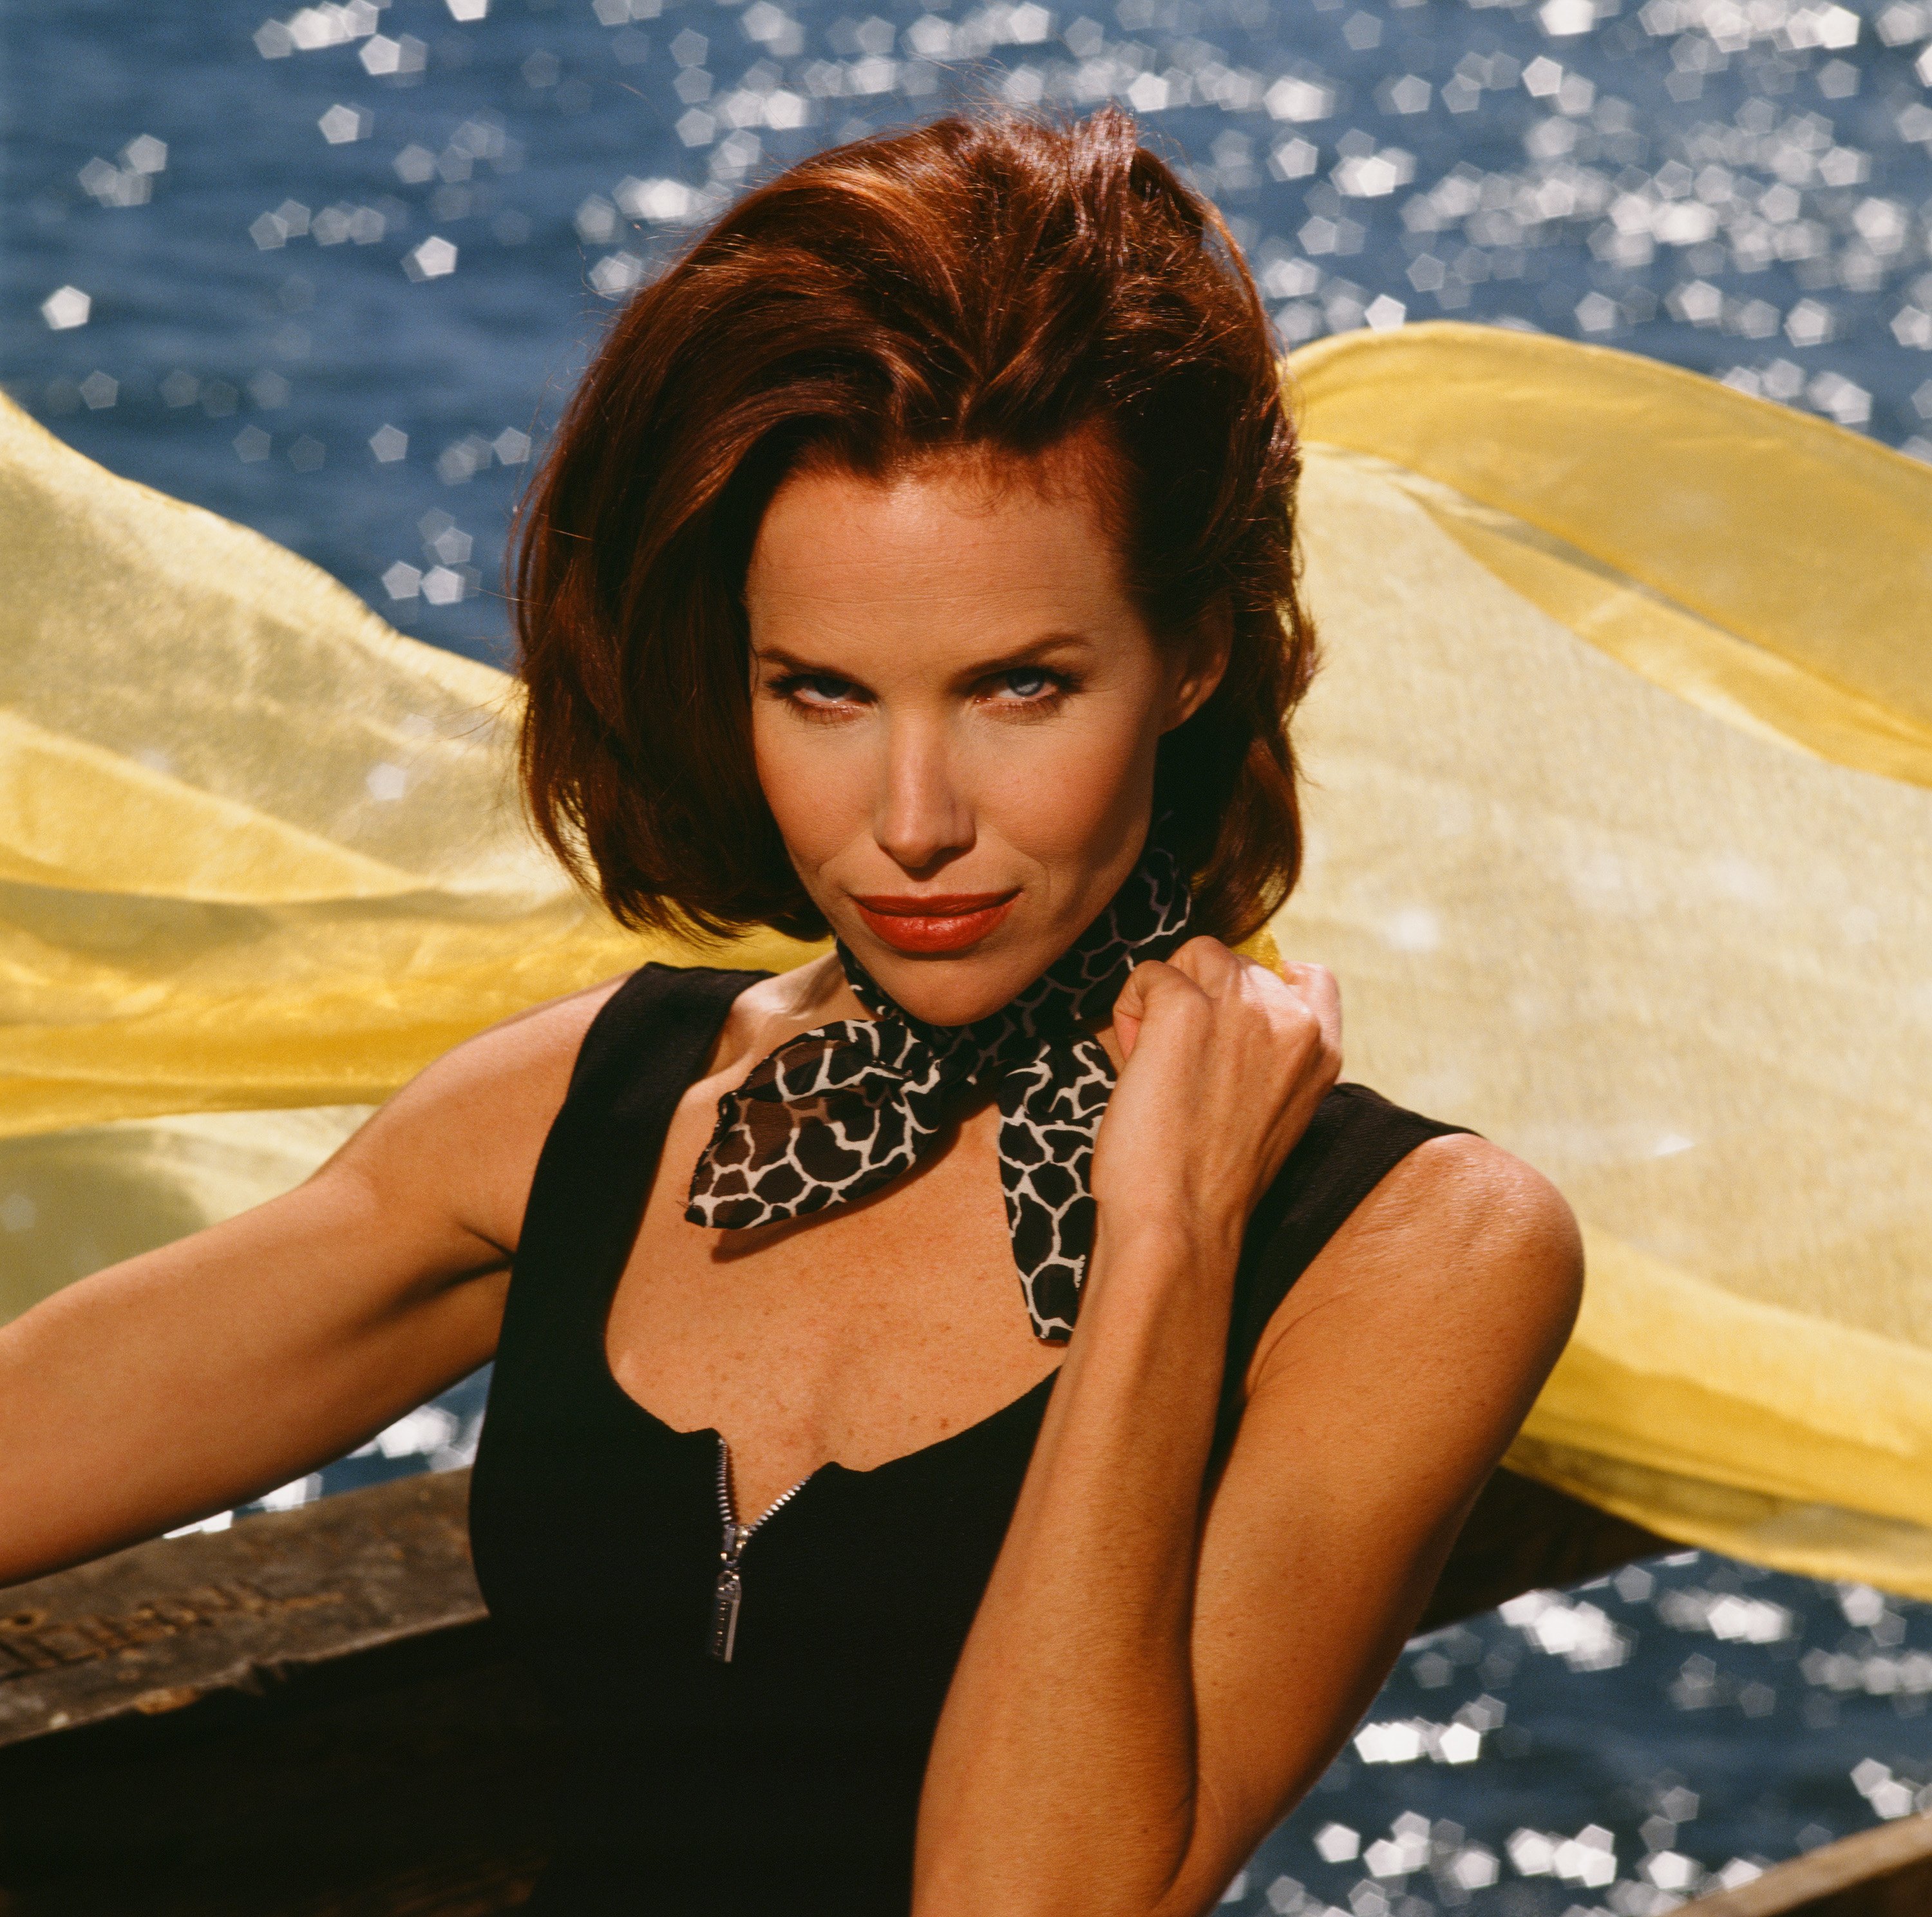 'Sunset Beach' actor Sarah Buxton wearing a black dress and leopard scarf; and standing on a pier.